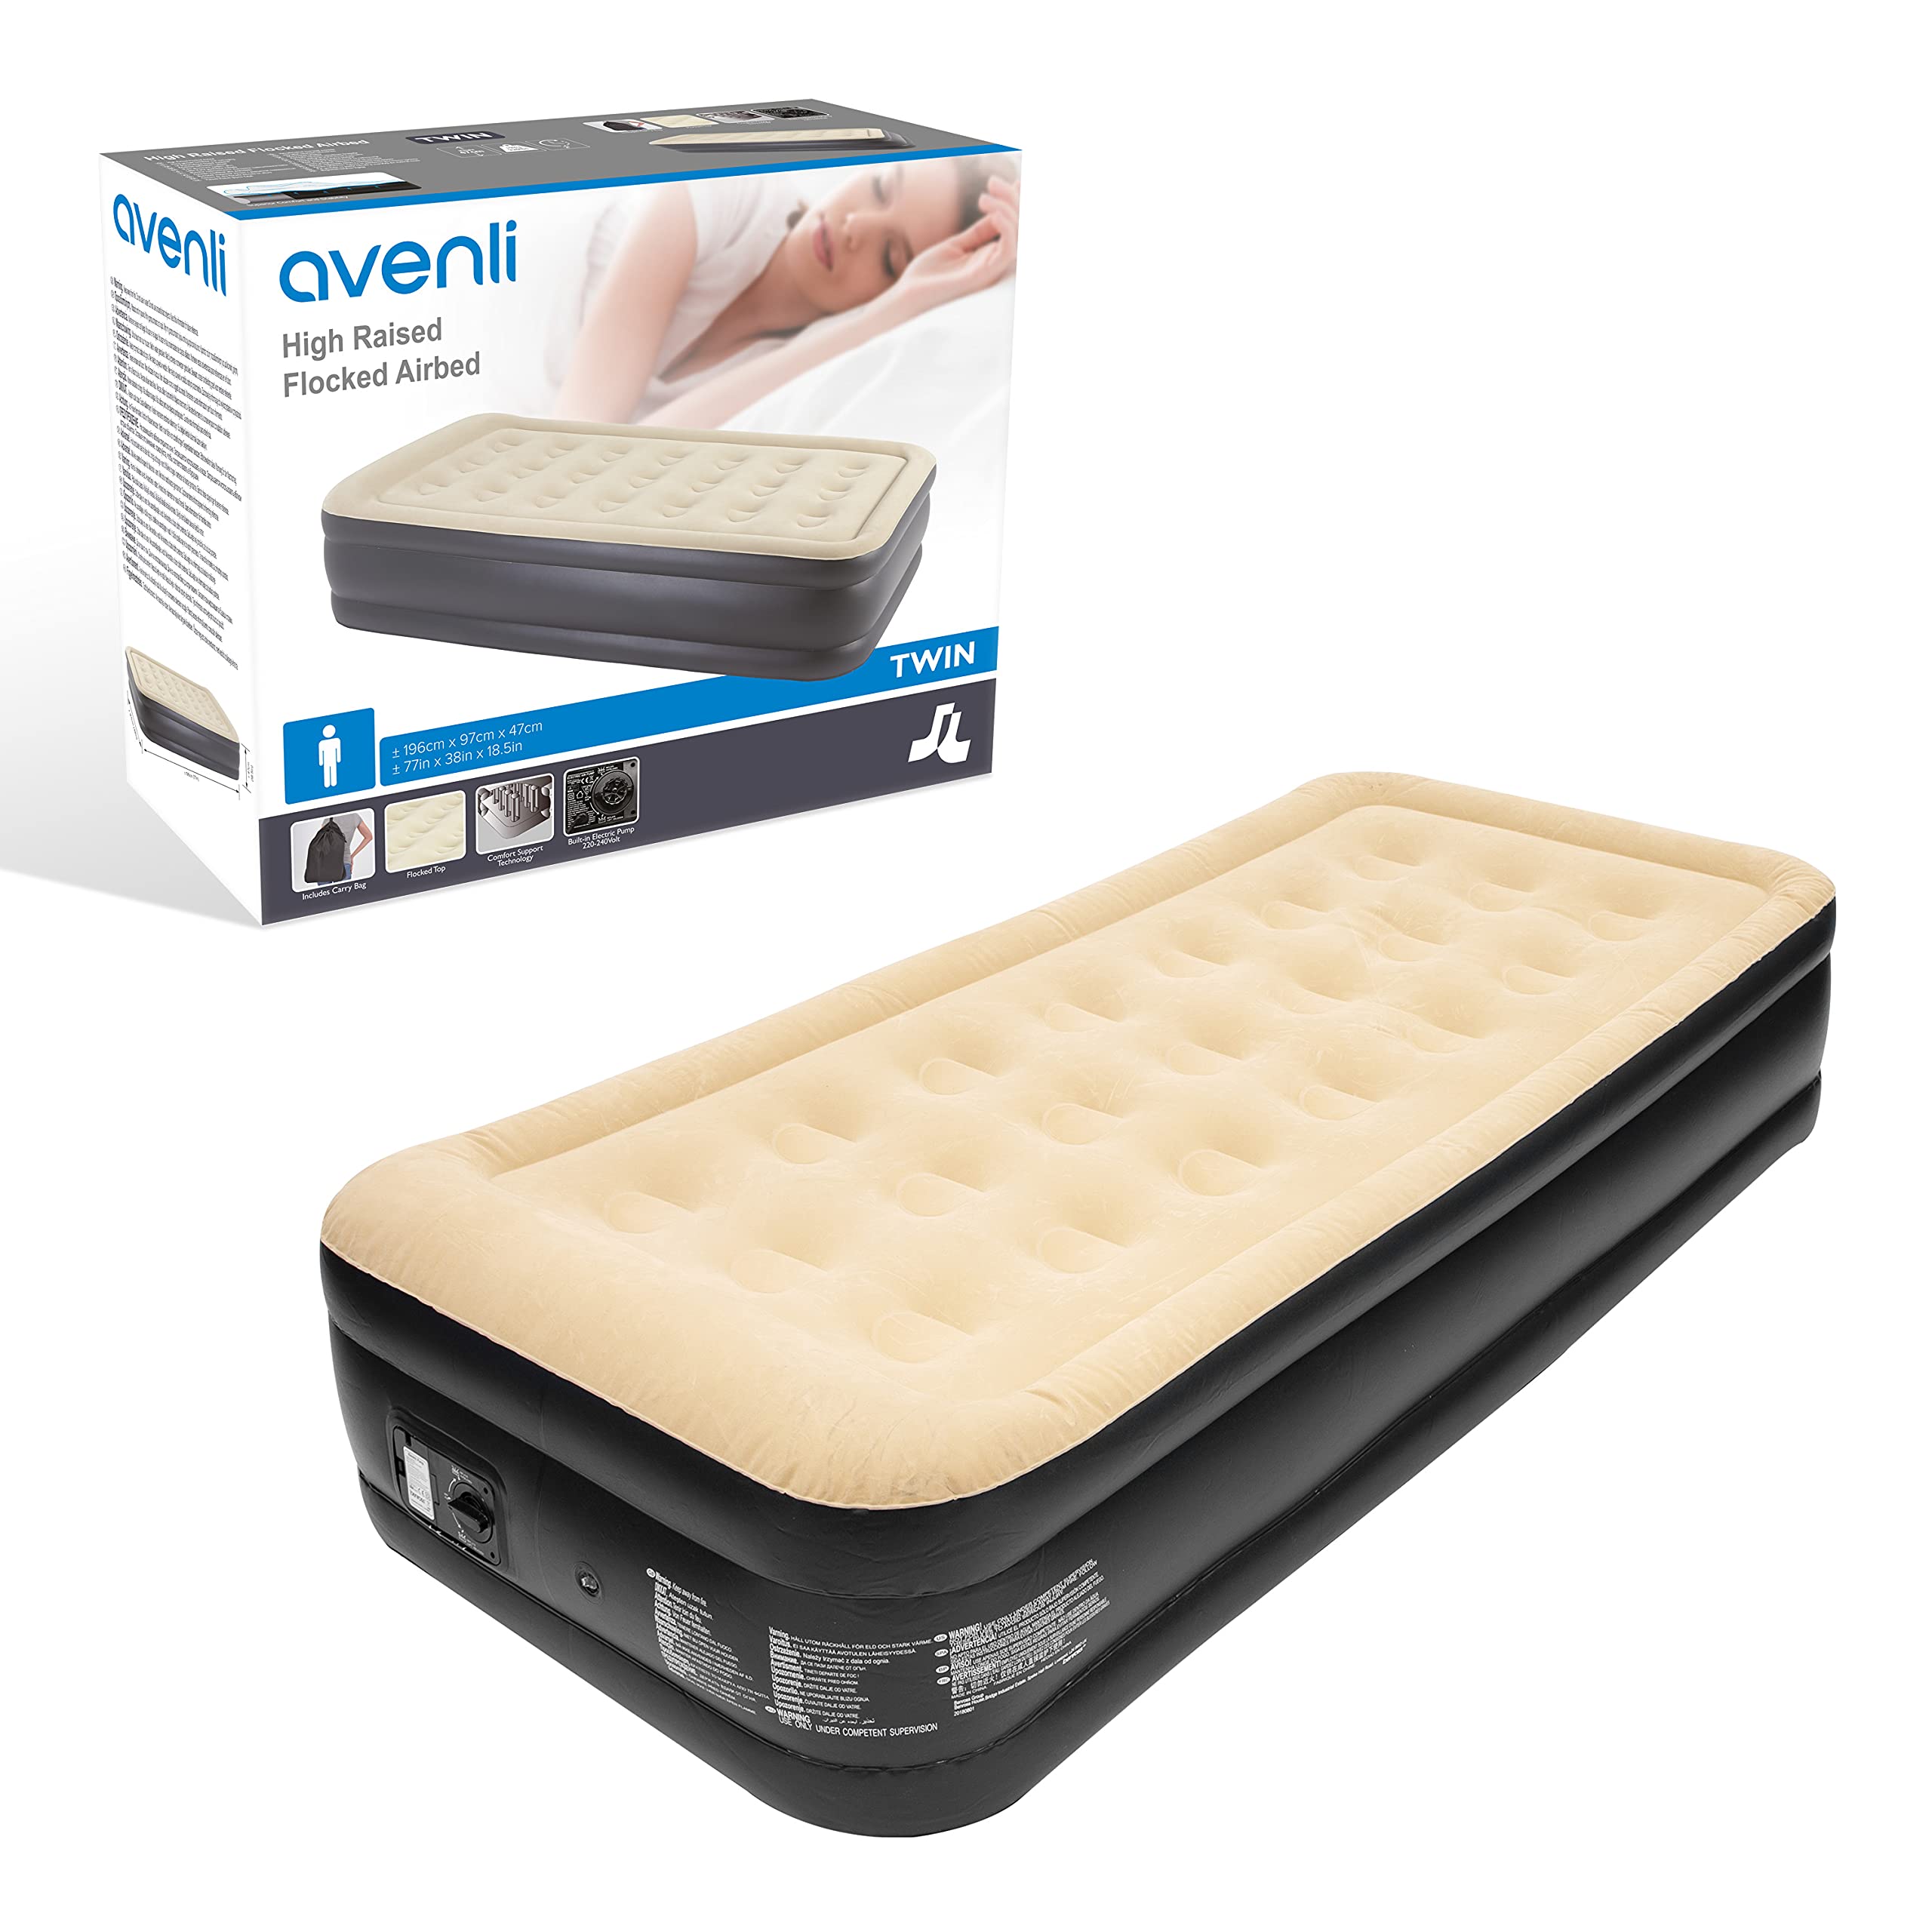 Avenli 88080 High Raised Flocked Airbed | Twin Size | Built in Pump | Quick & Easy Inflation, Vinyl, Beige/Black